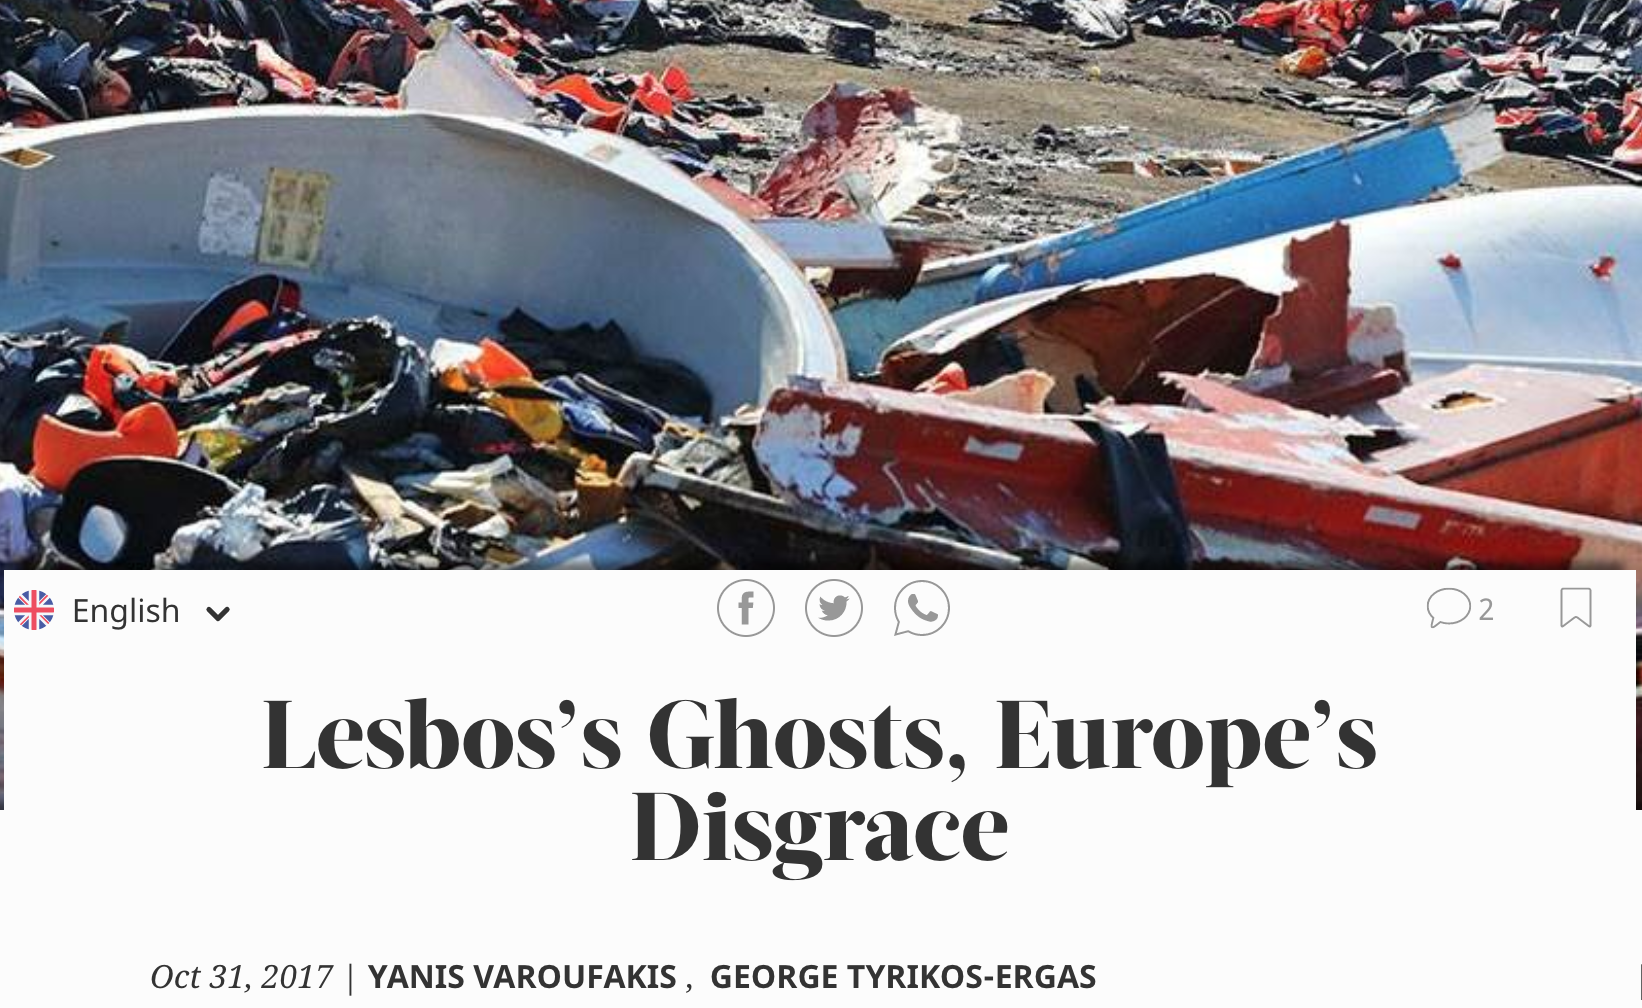 Lesbos’s Ghosts, Europe’s Disgrace – Project Syndicate op-ed, 31st October 2017